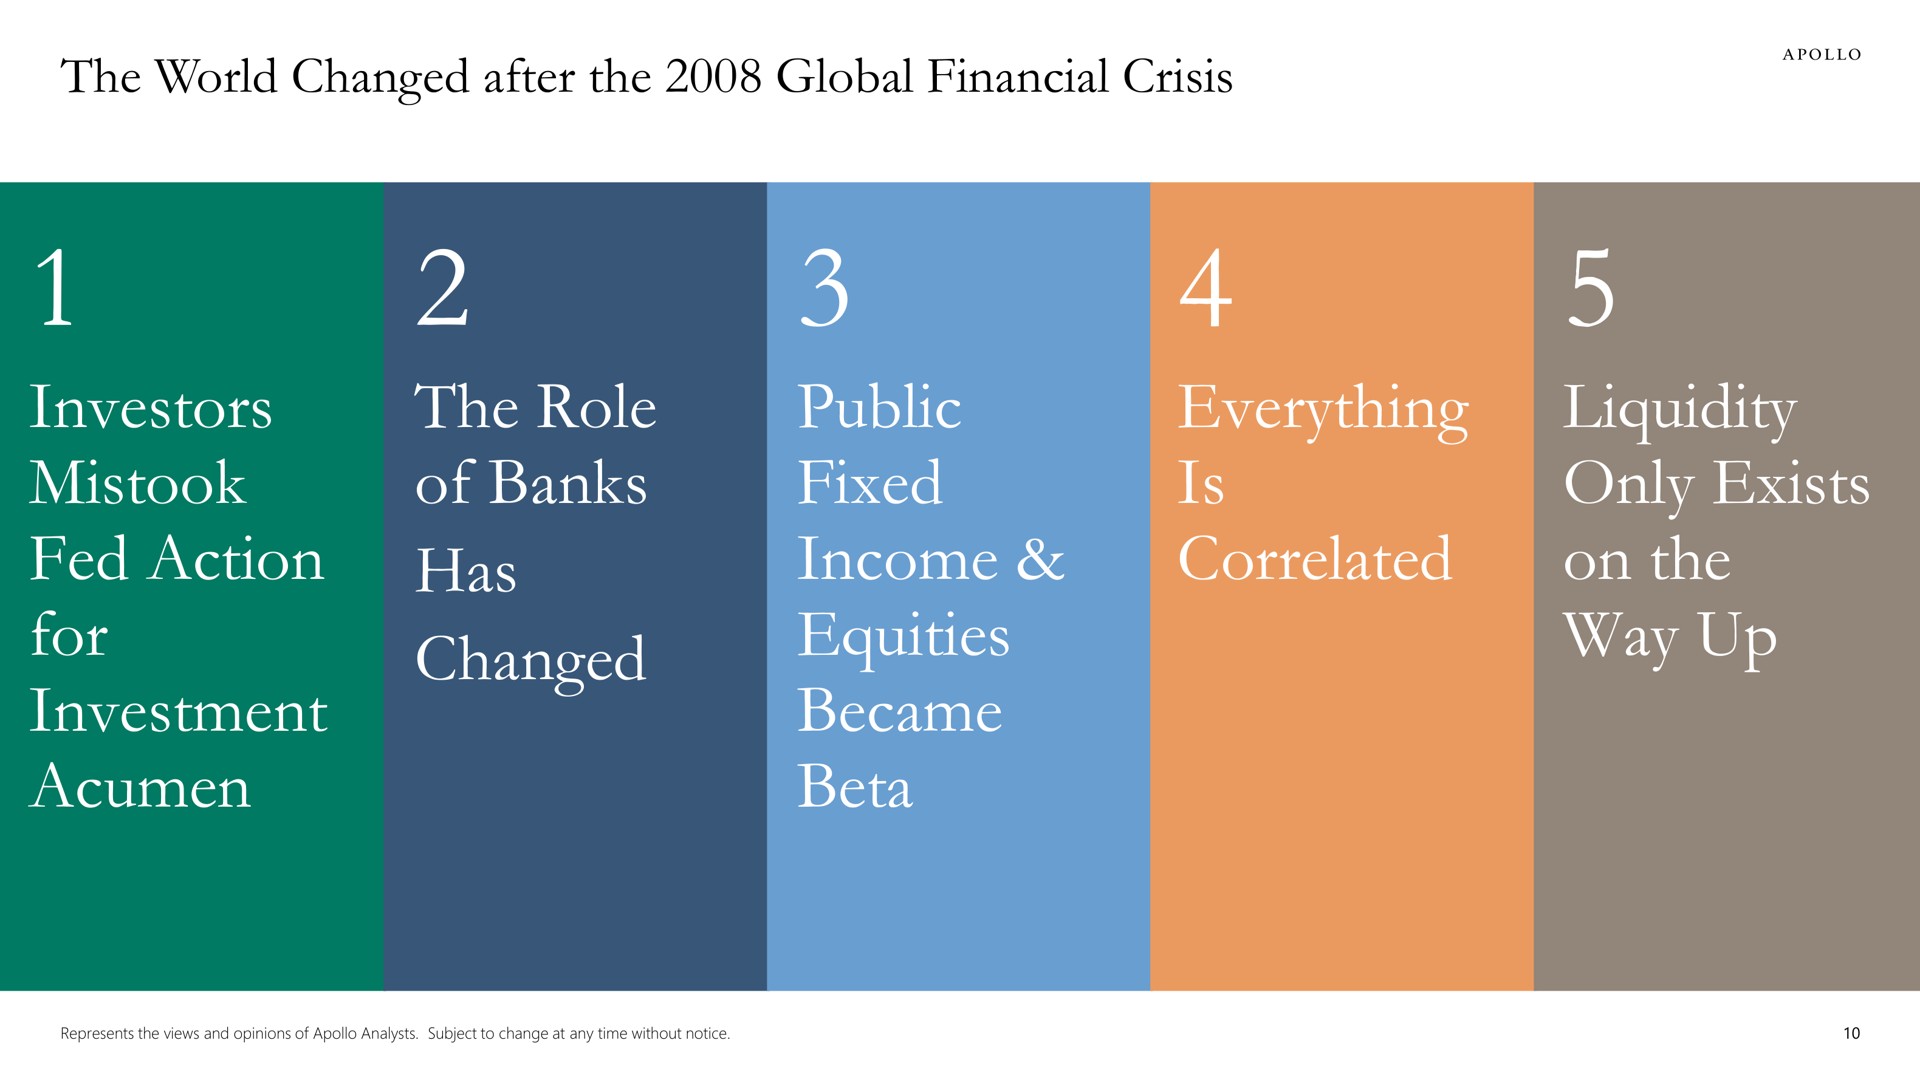 the world changed after the global financial crisis investors mistook fed action for investment acumen the role of banks has changed public fixed income equities became beta everything is correlated liquidity only exists on the way up a | Apollo Global Management